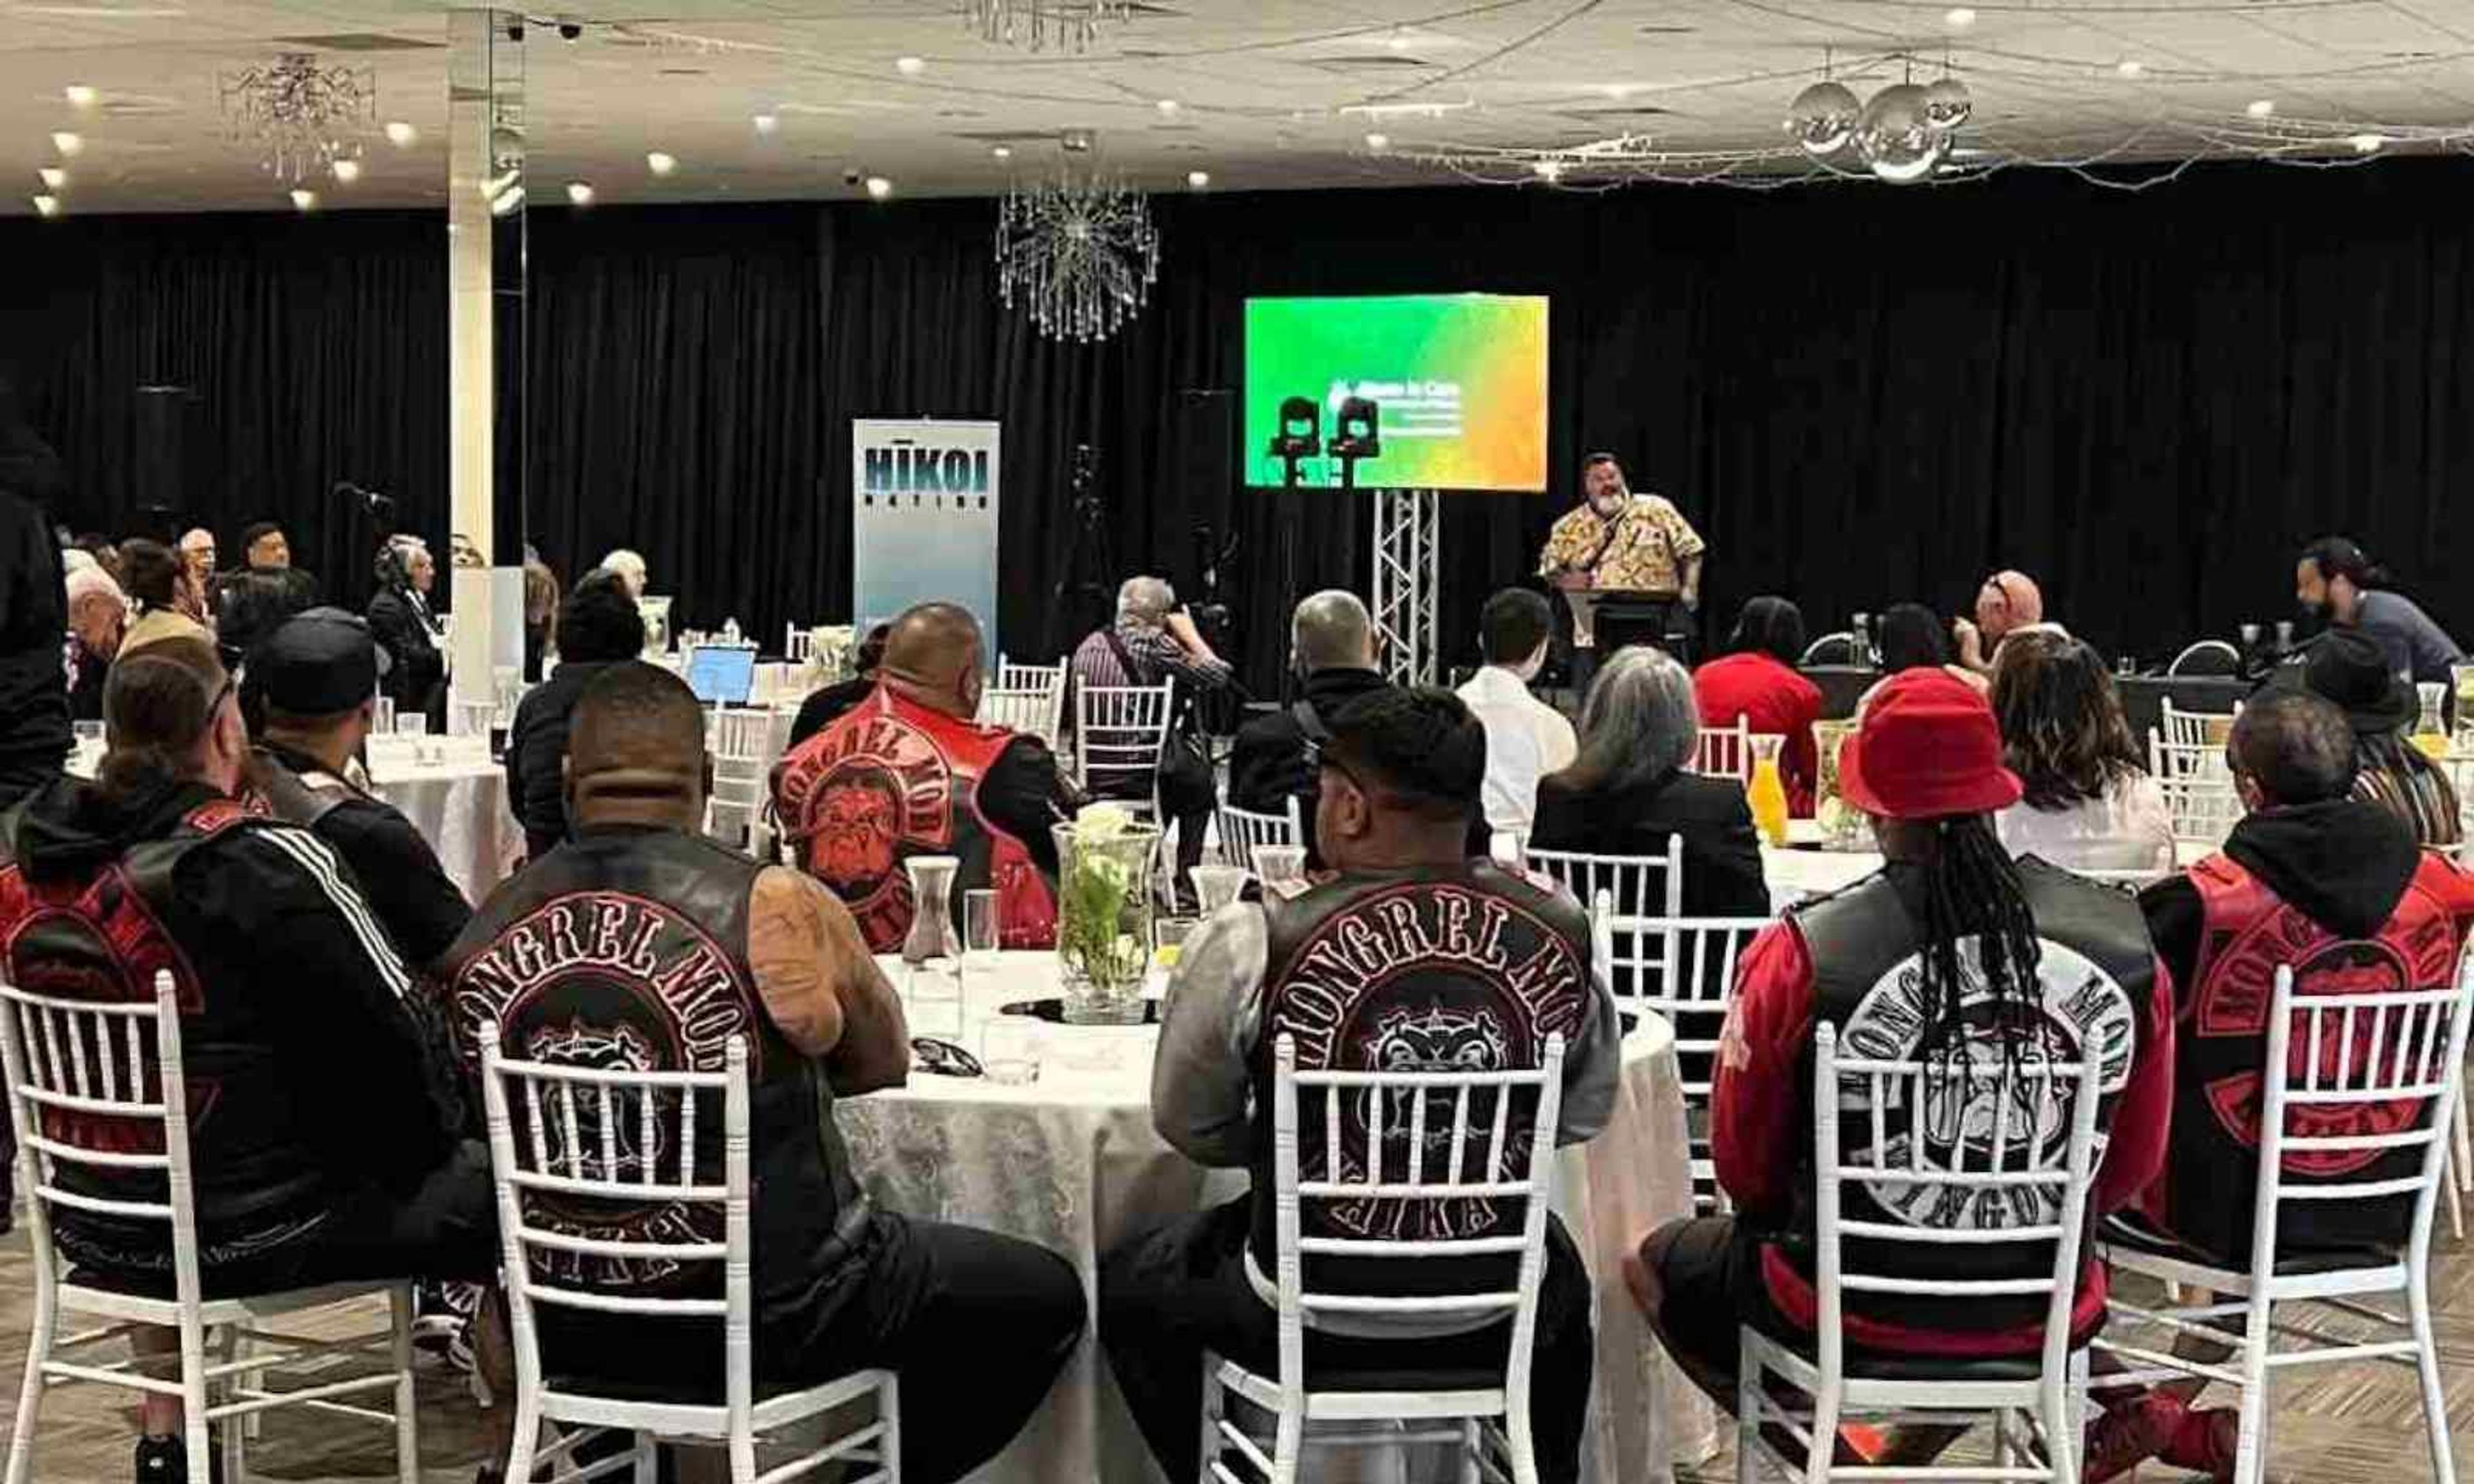 ​Gang members converged on Manukau for a conference about addressing past trauma and healing. 